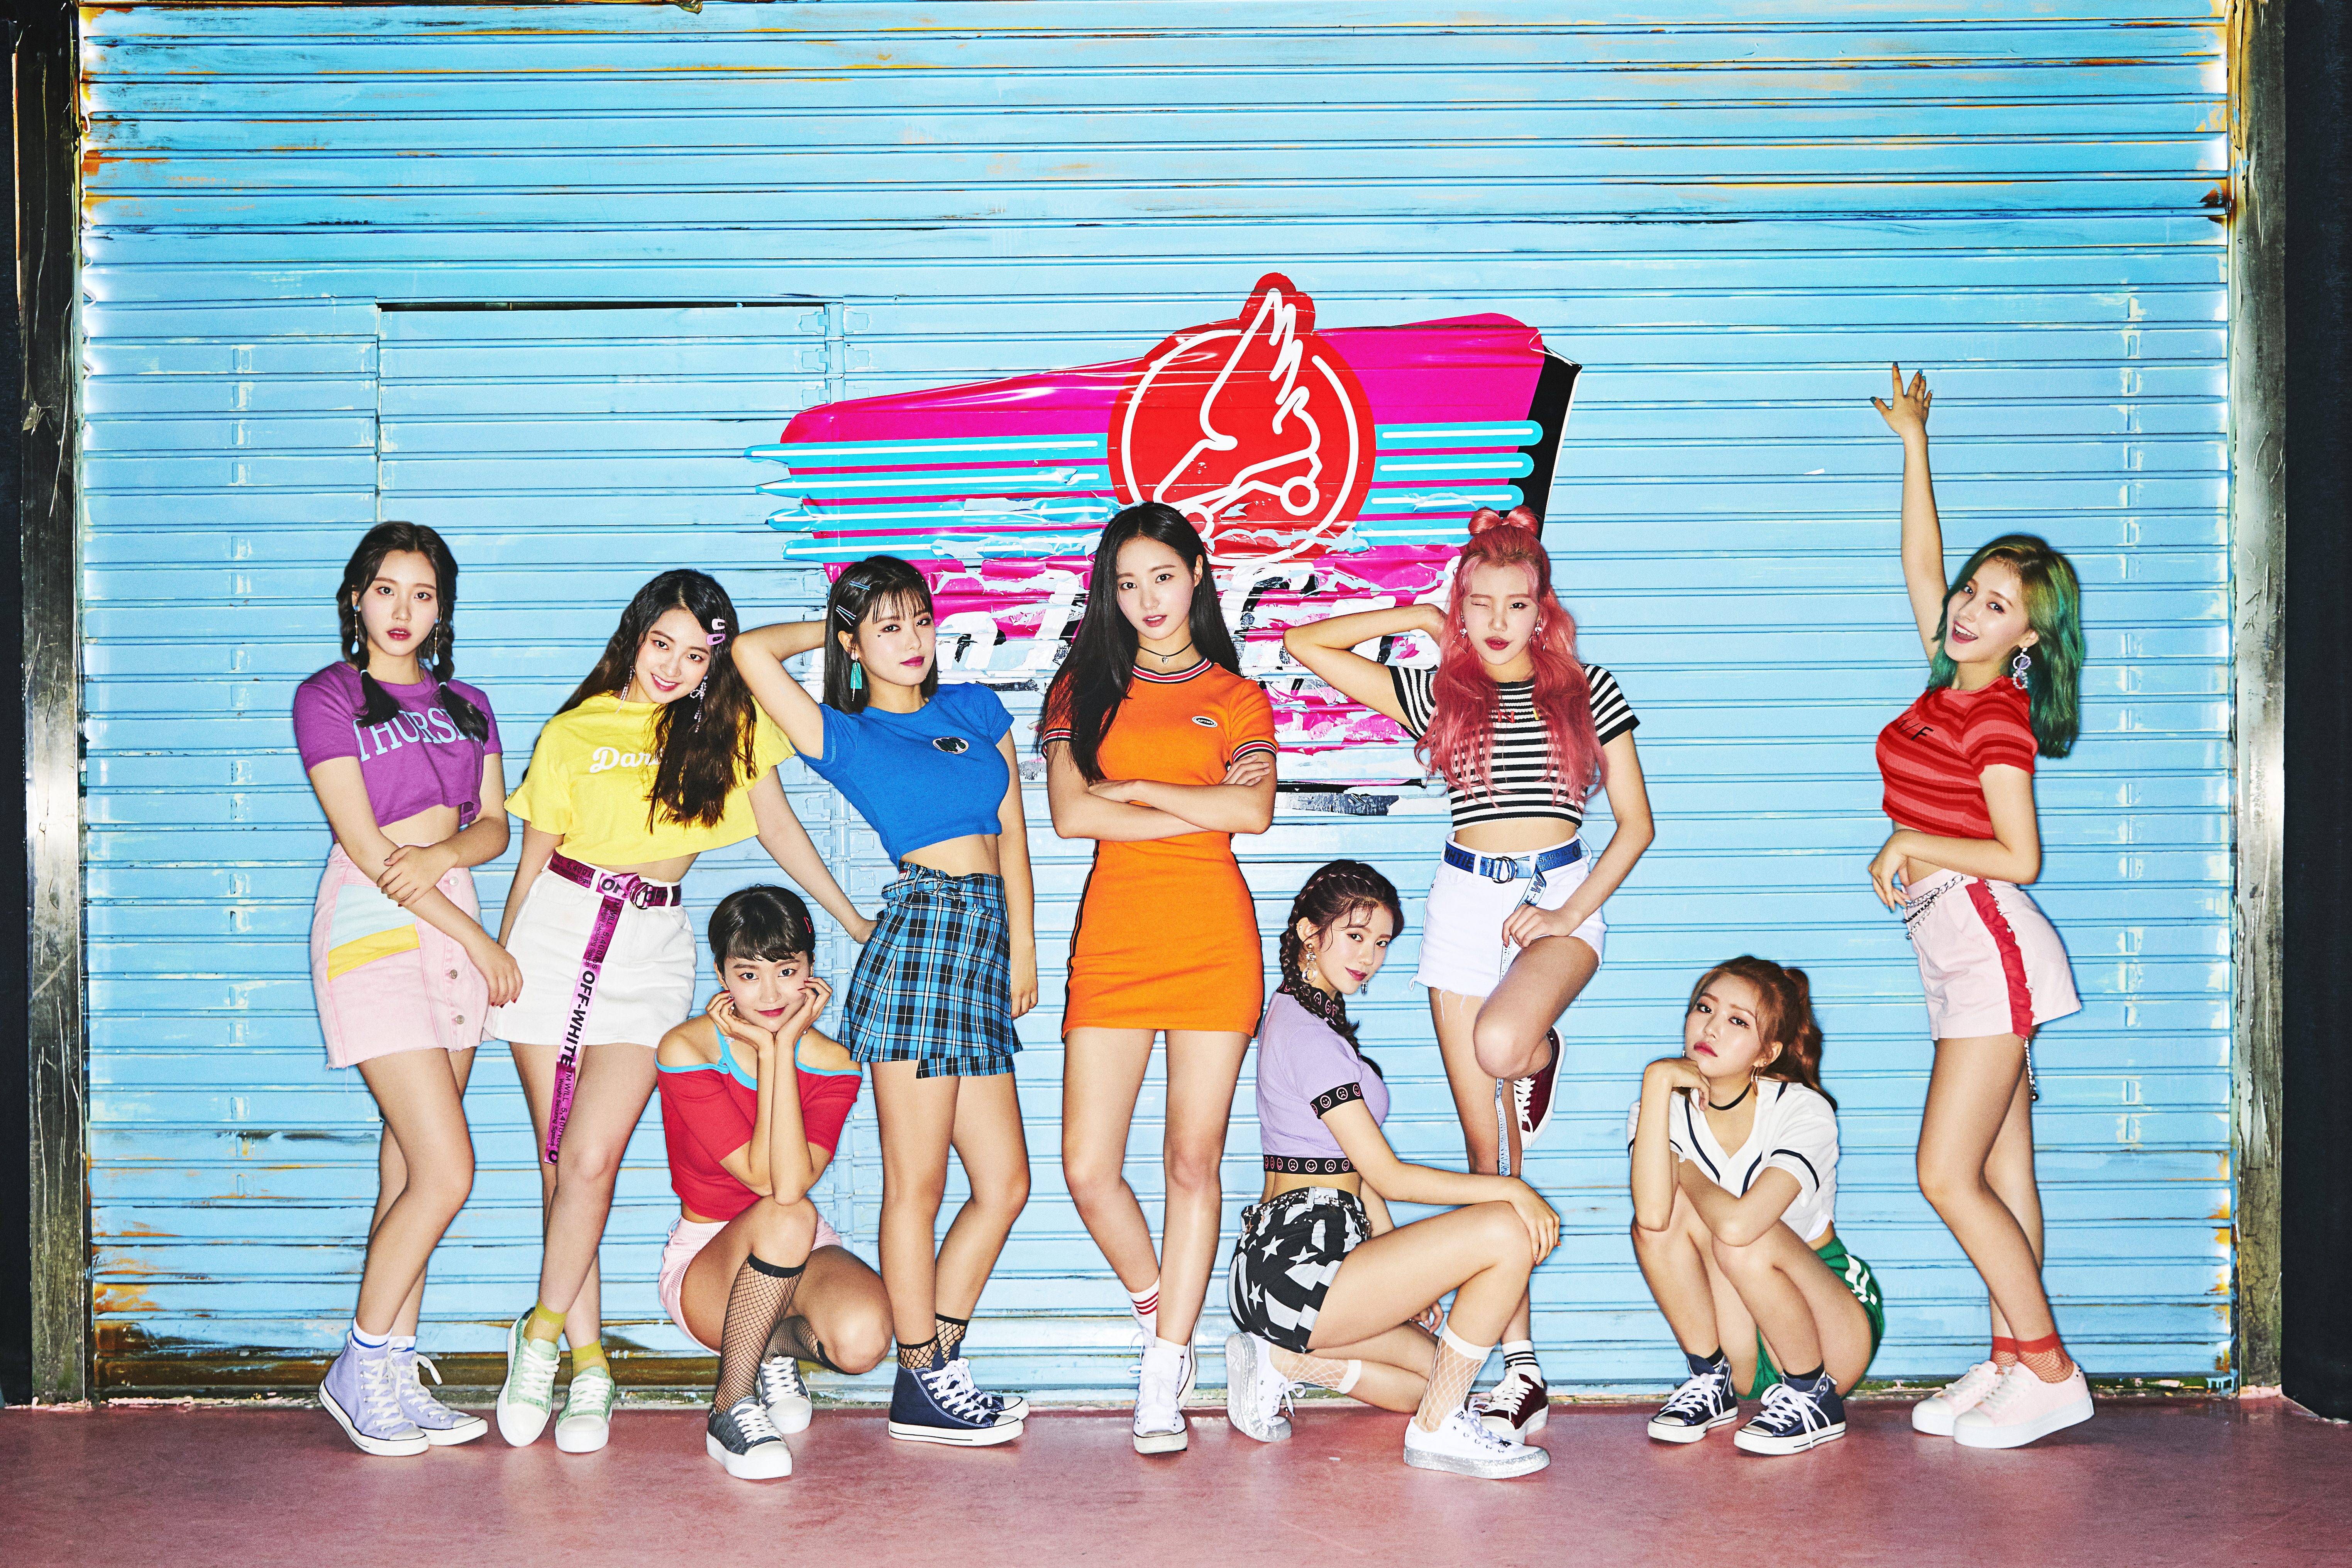 Momoland Wallpapers